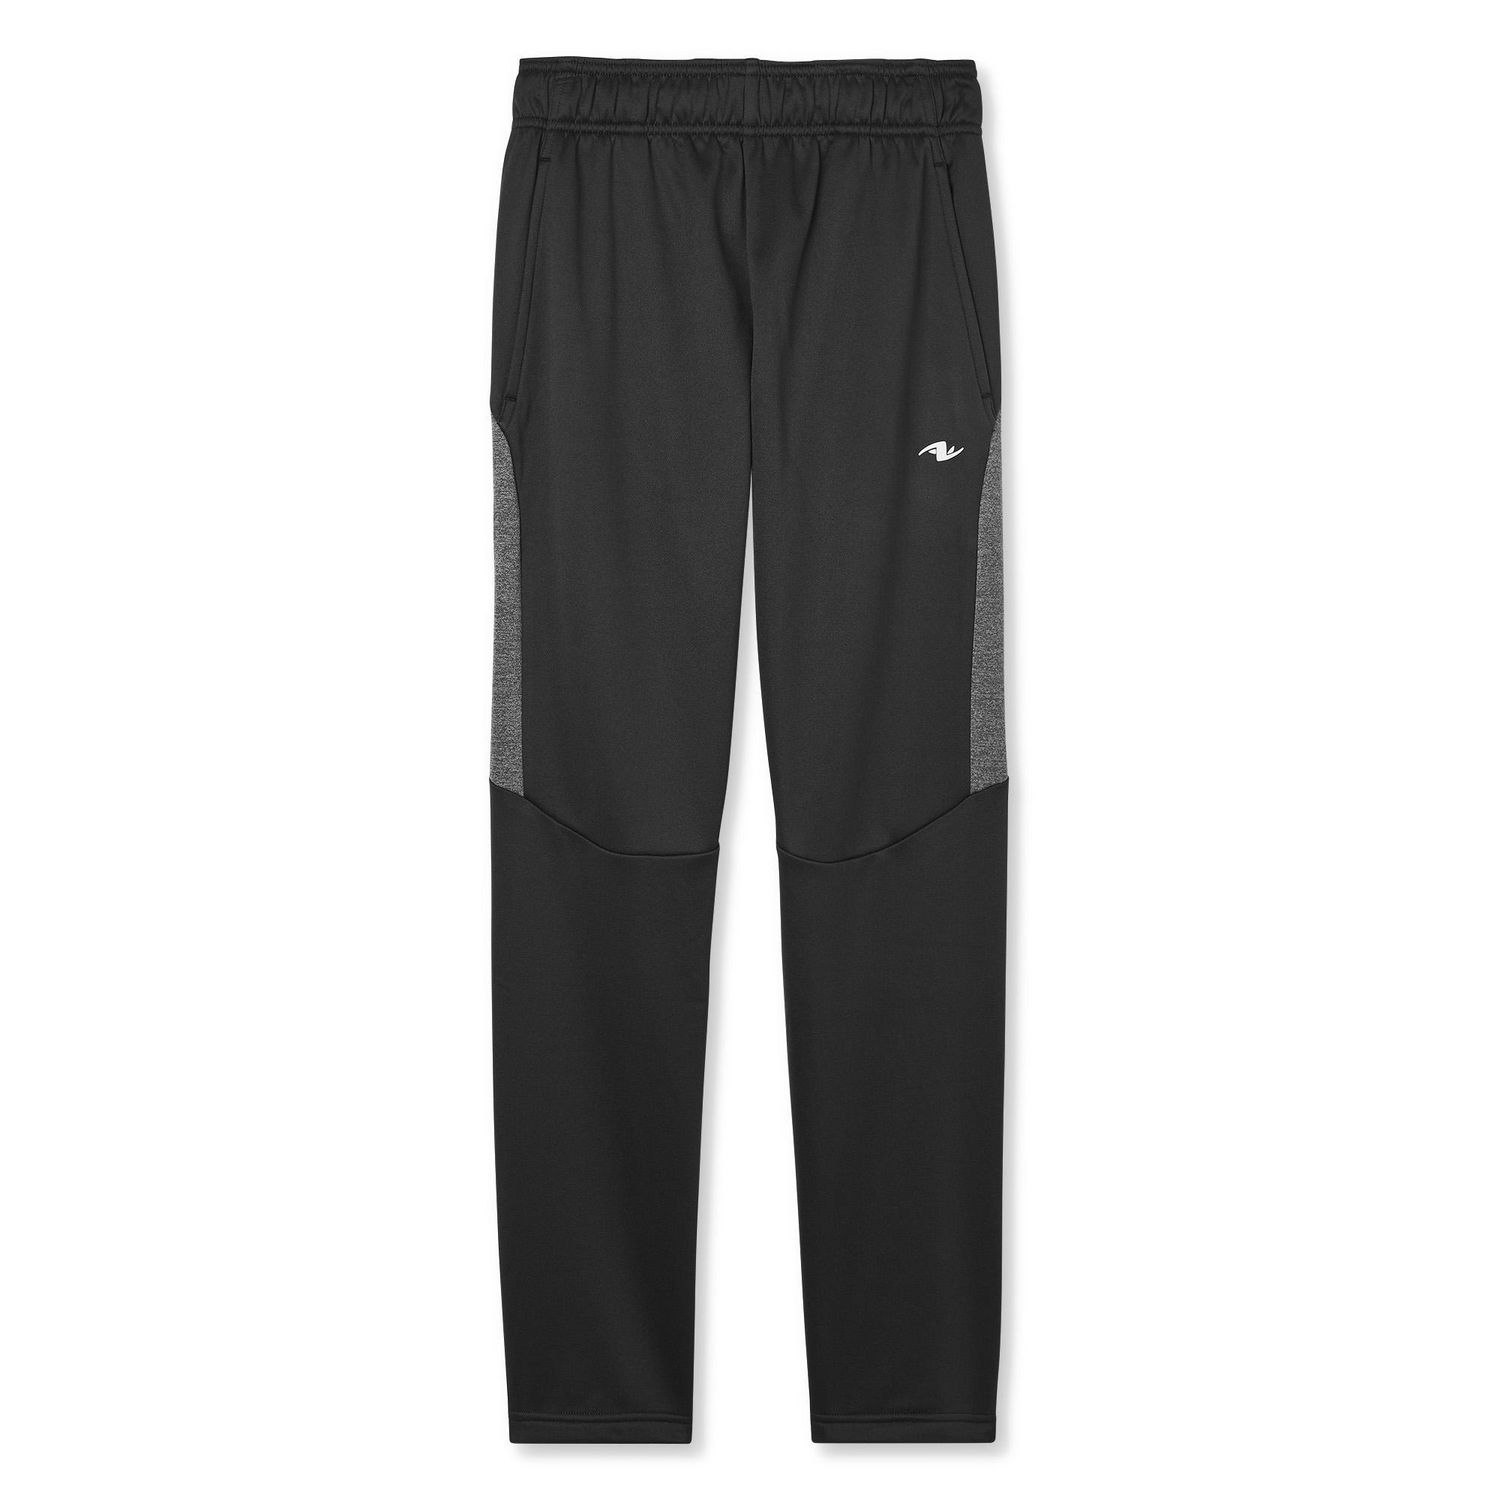 Athletic Works Boys' Cut and Sew Active Pant | Walmart Canada